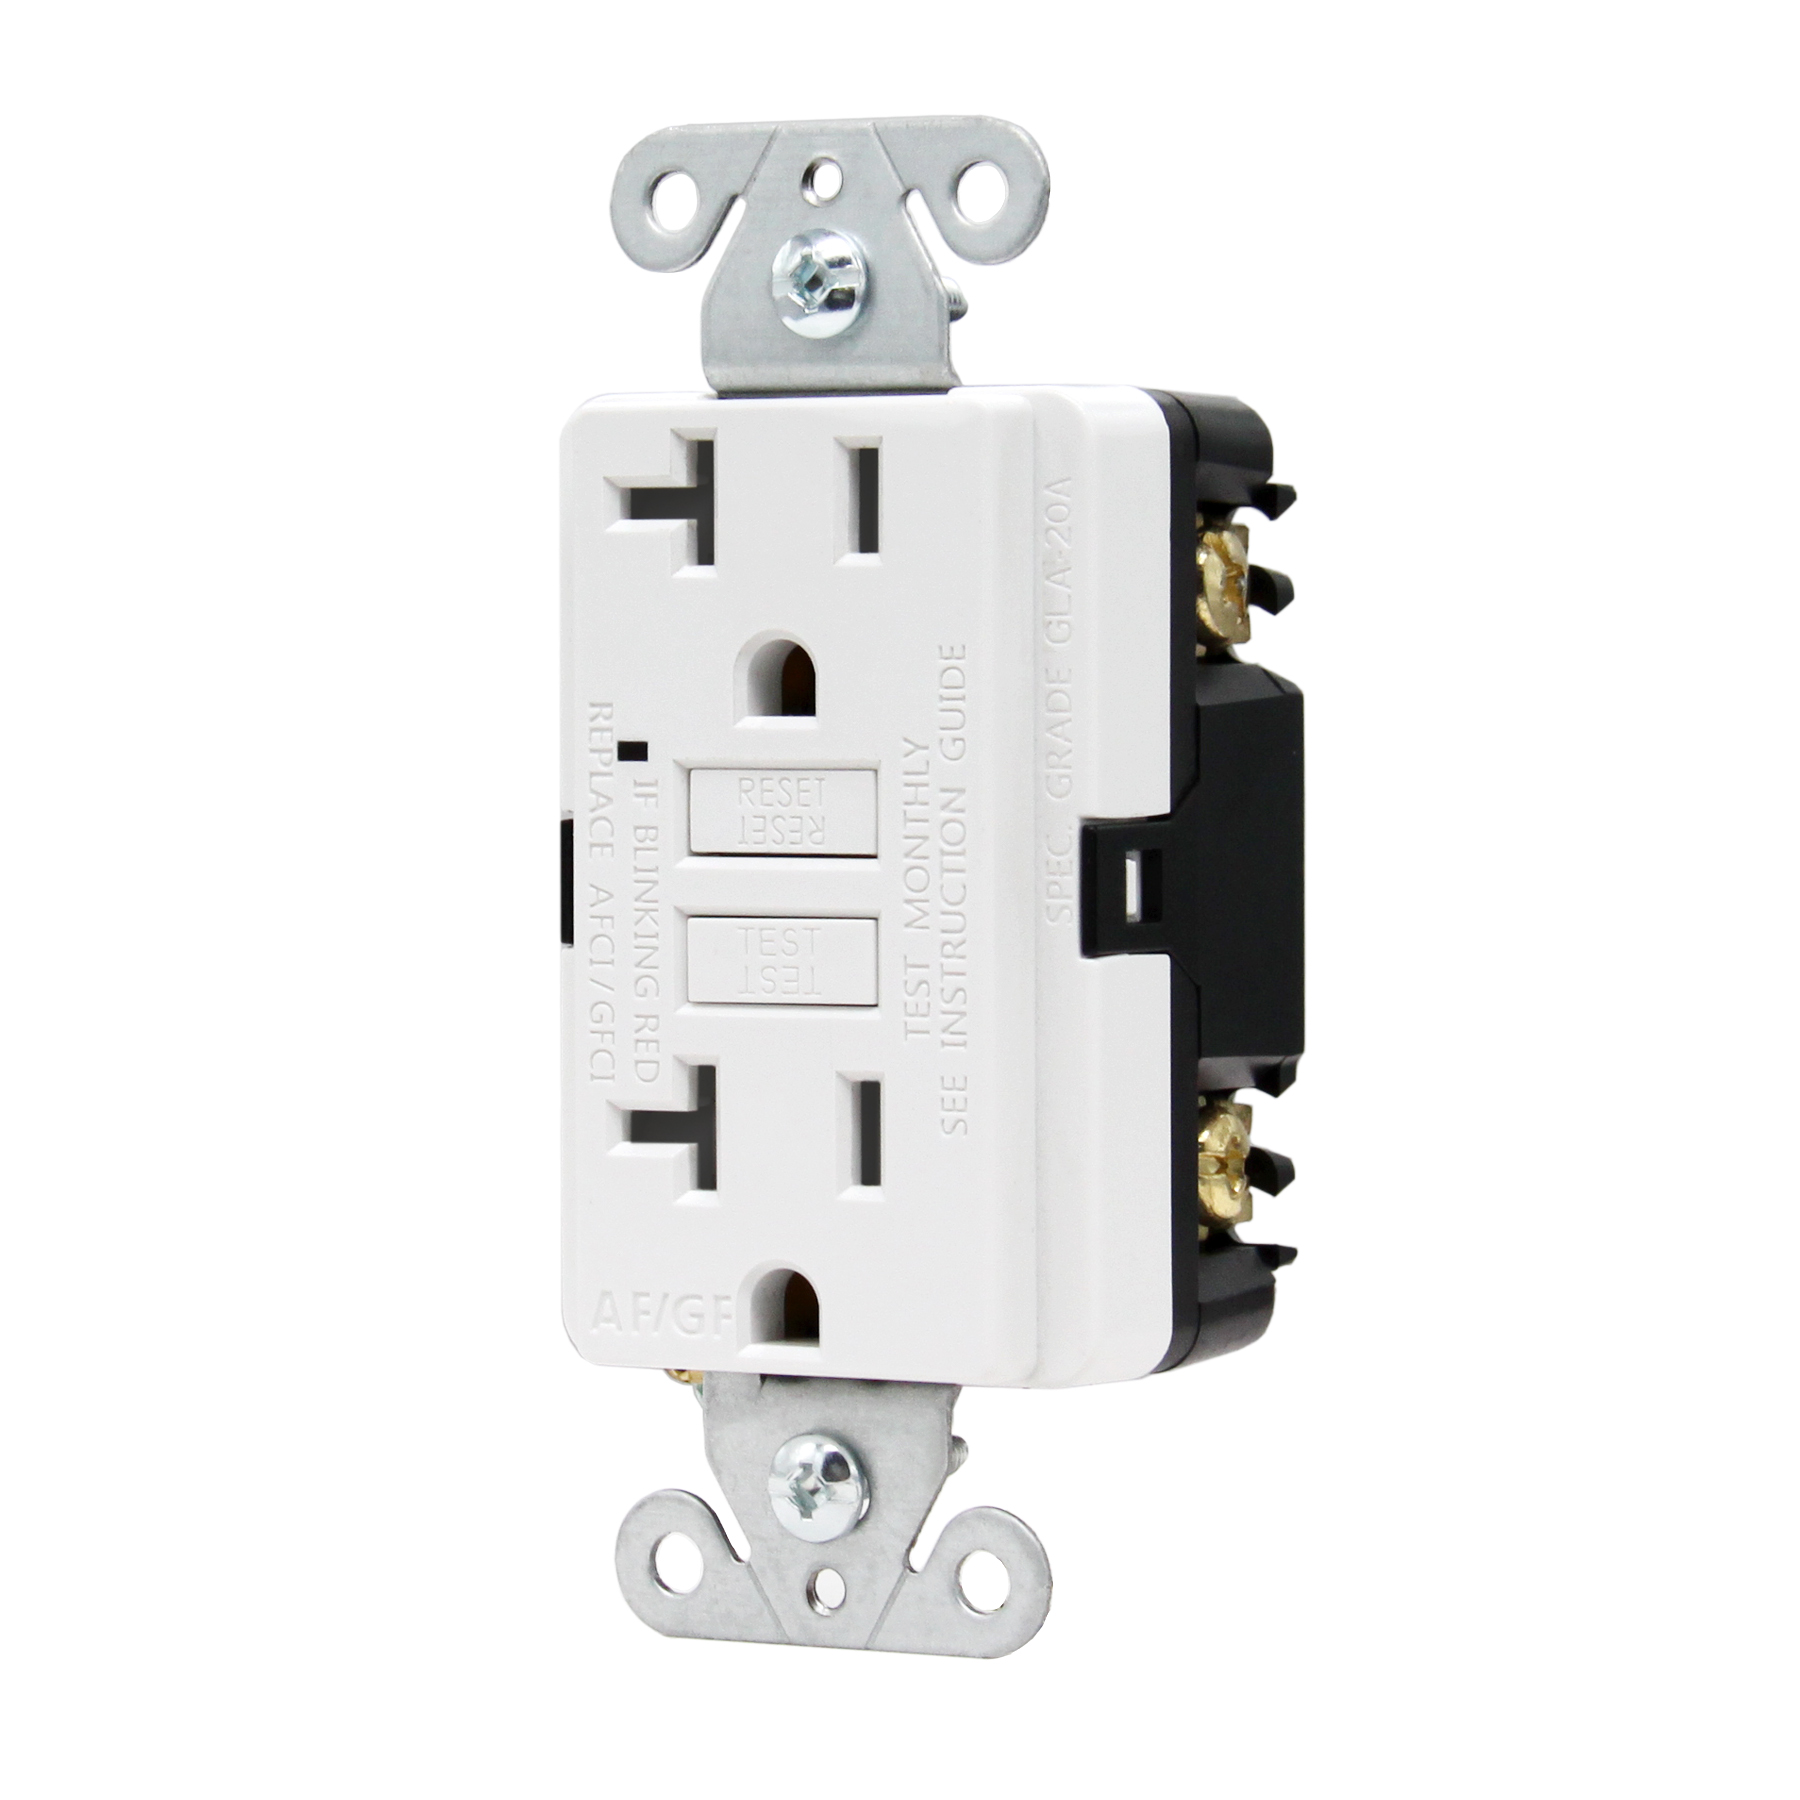 UL Listed New Arrival Self-Test 20 Amp/125V Dual Function AFCI/GFCI Receptacle, GLA-20A